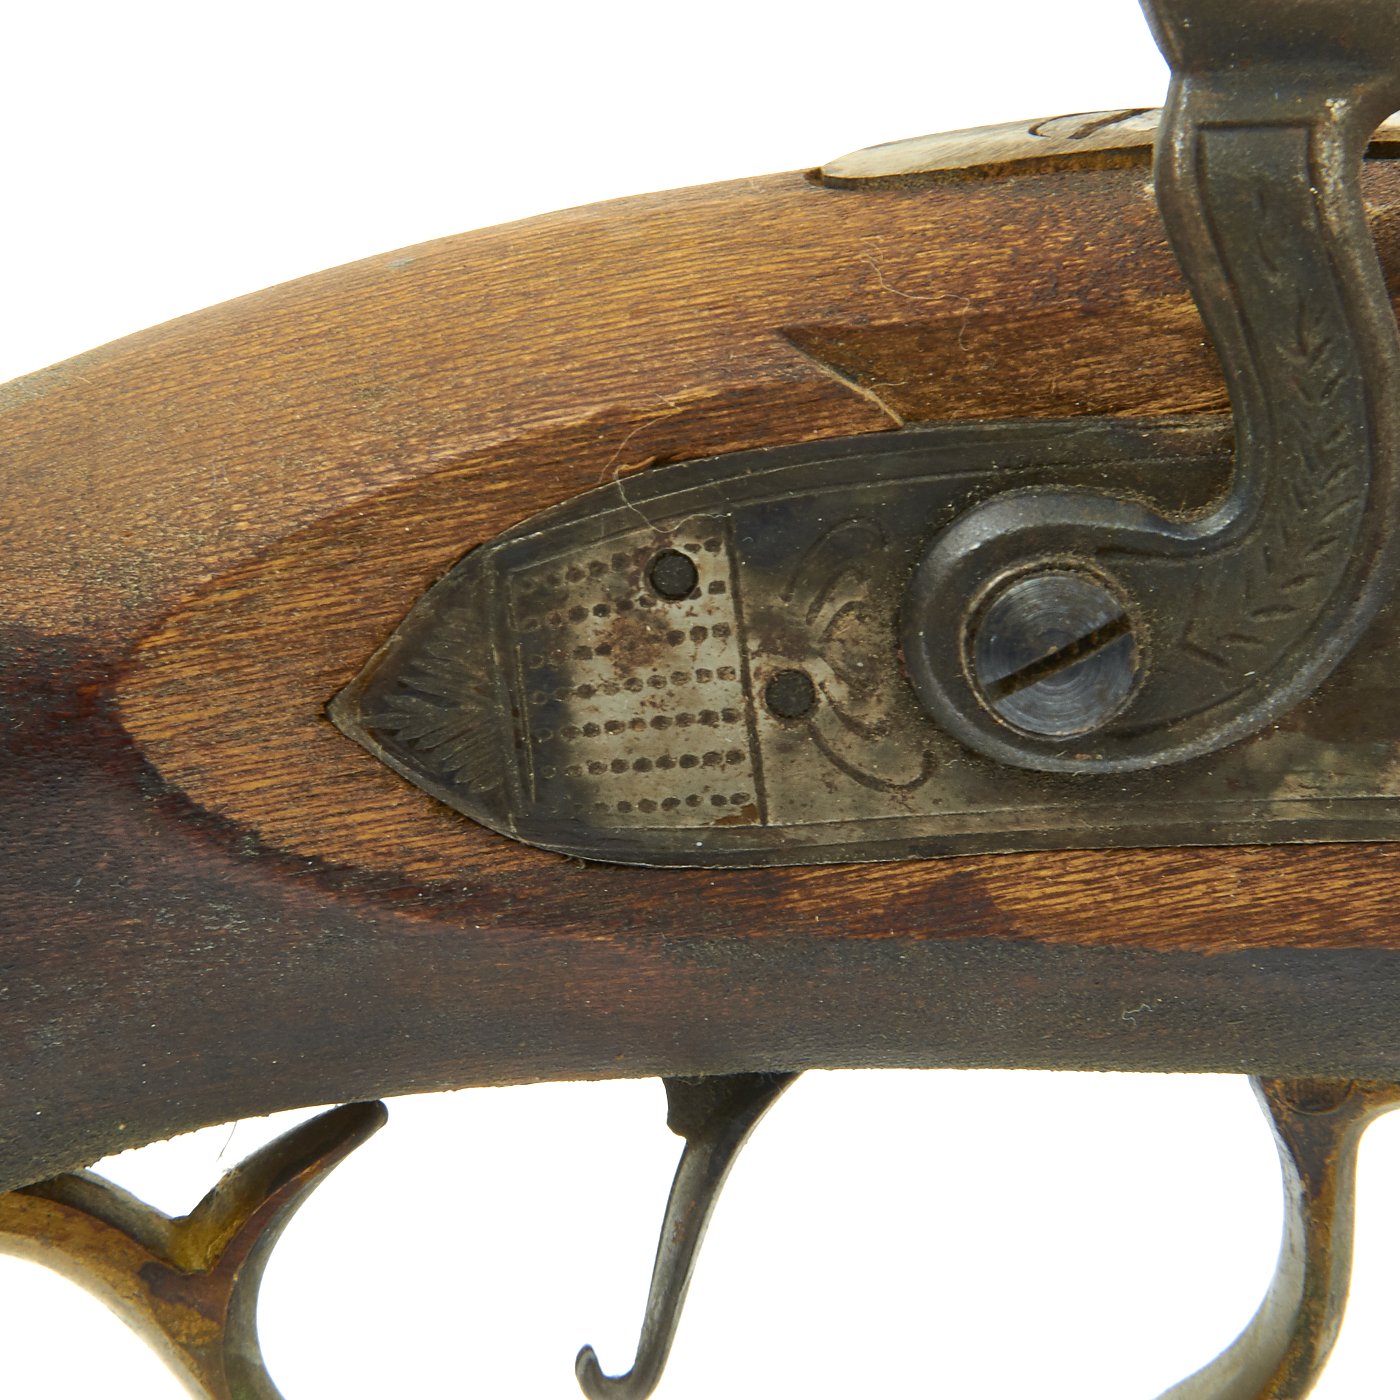 Made-from-kit Kentucky rifle in 45 caliber, from an obscure Spanish  company, Jukar